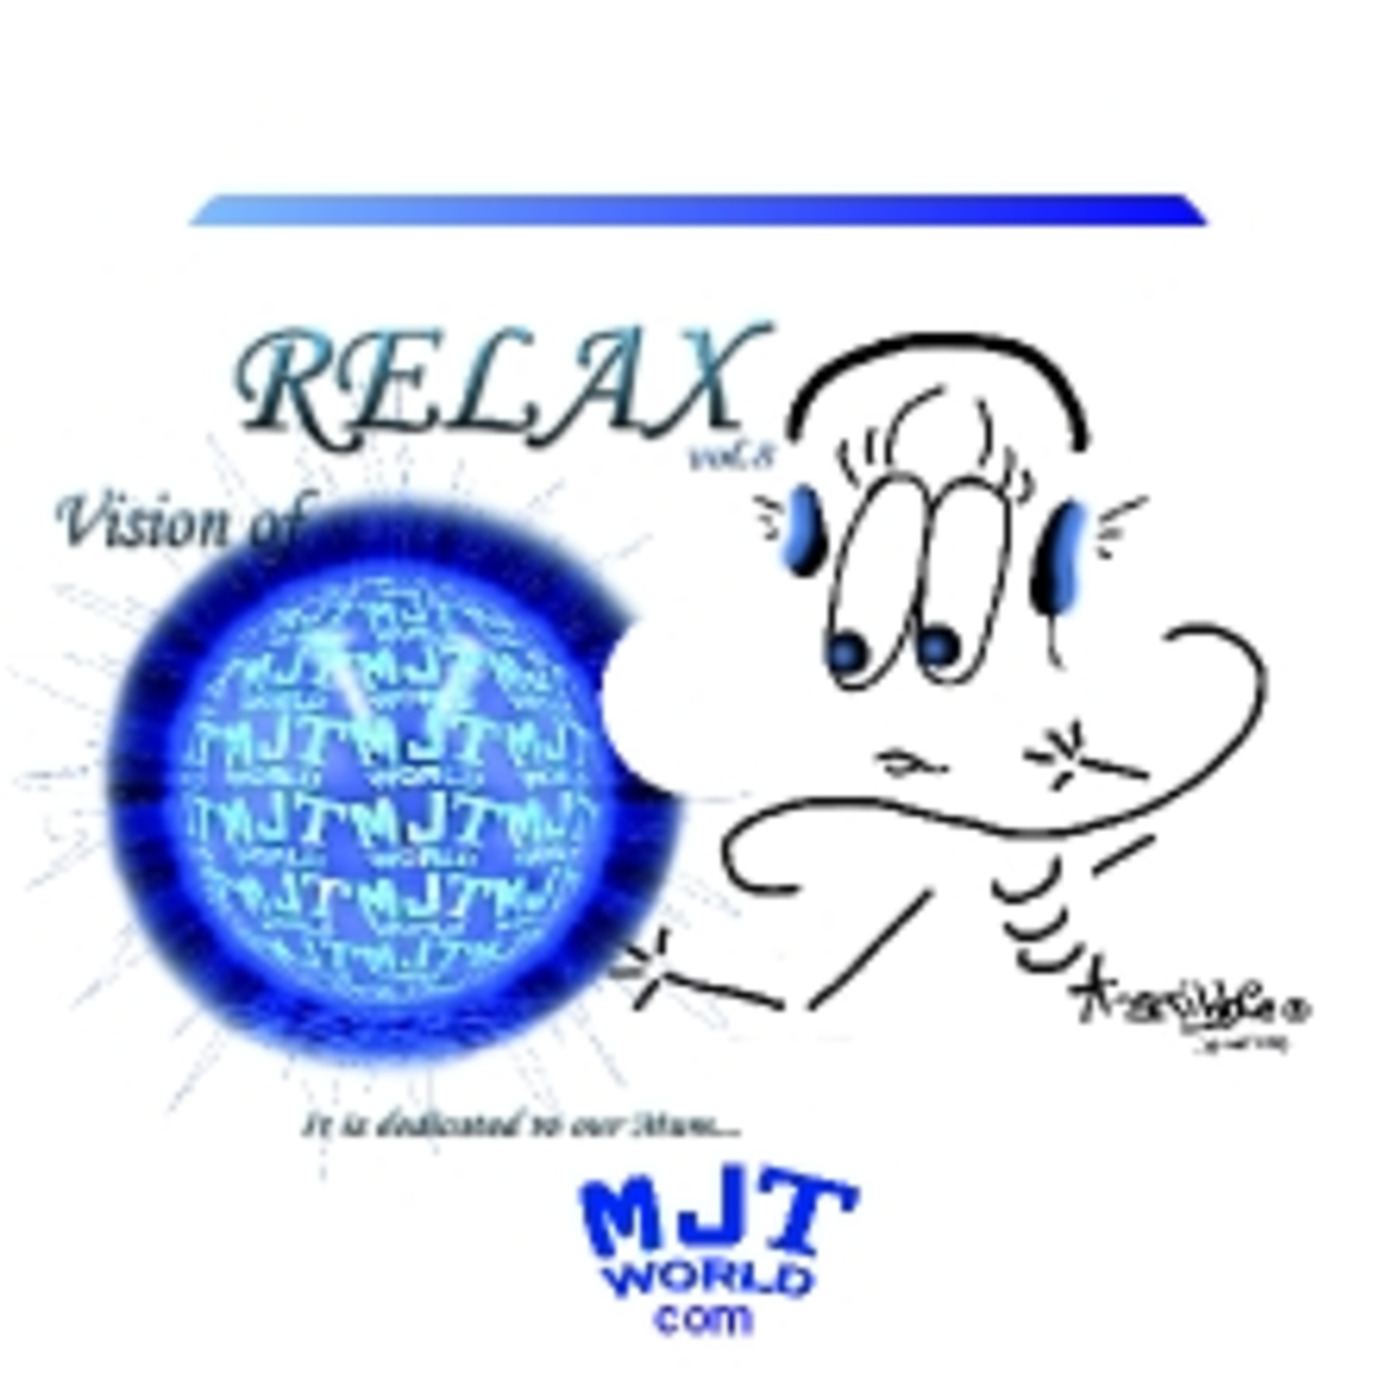 Vision of RELAX Vol.8